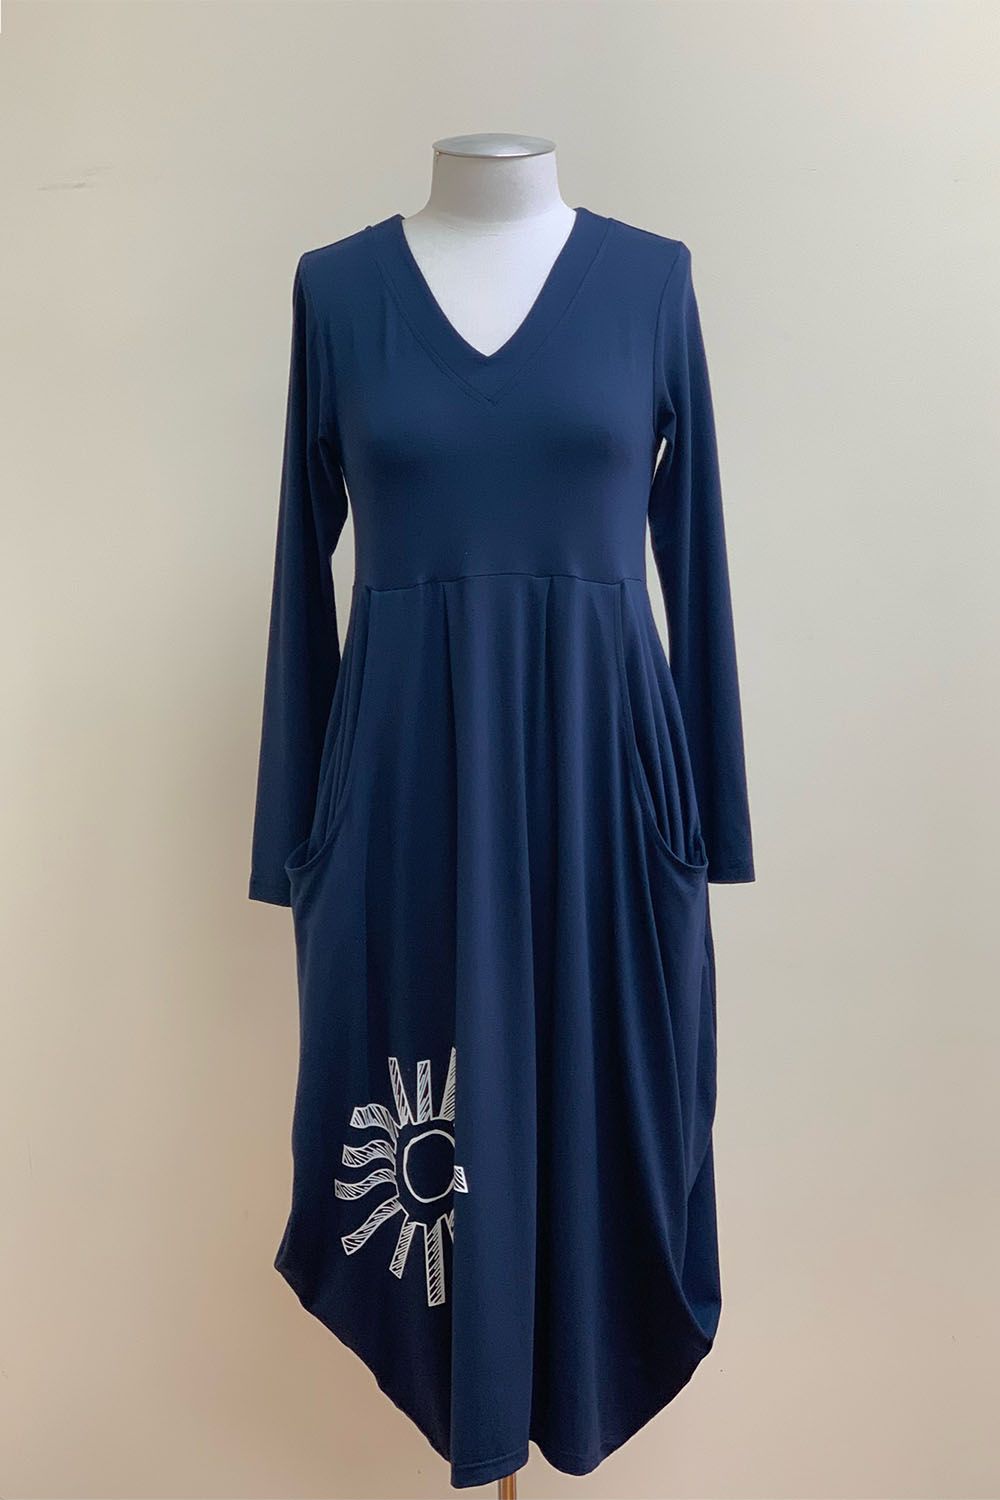 Bittermoon - Carly Dress - Sun Screen Print - Navy/White with 3/4 sleeves